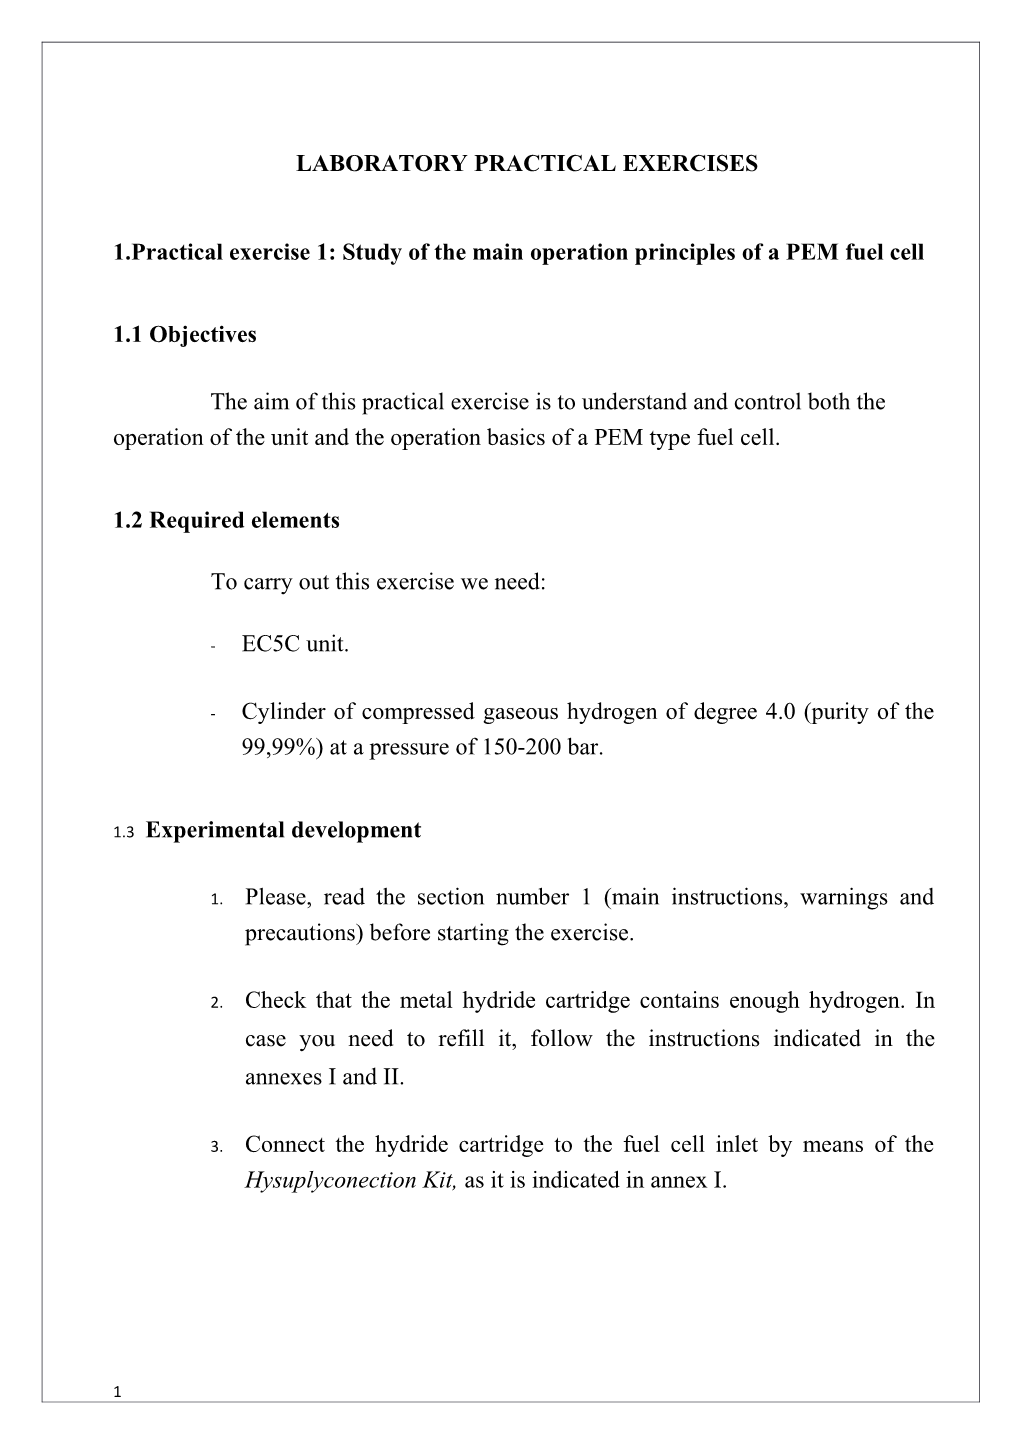 1.Practical Exercise 1: Study of the Main Operation Principles of a PEM Fuel Cell